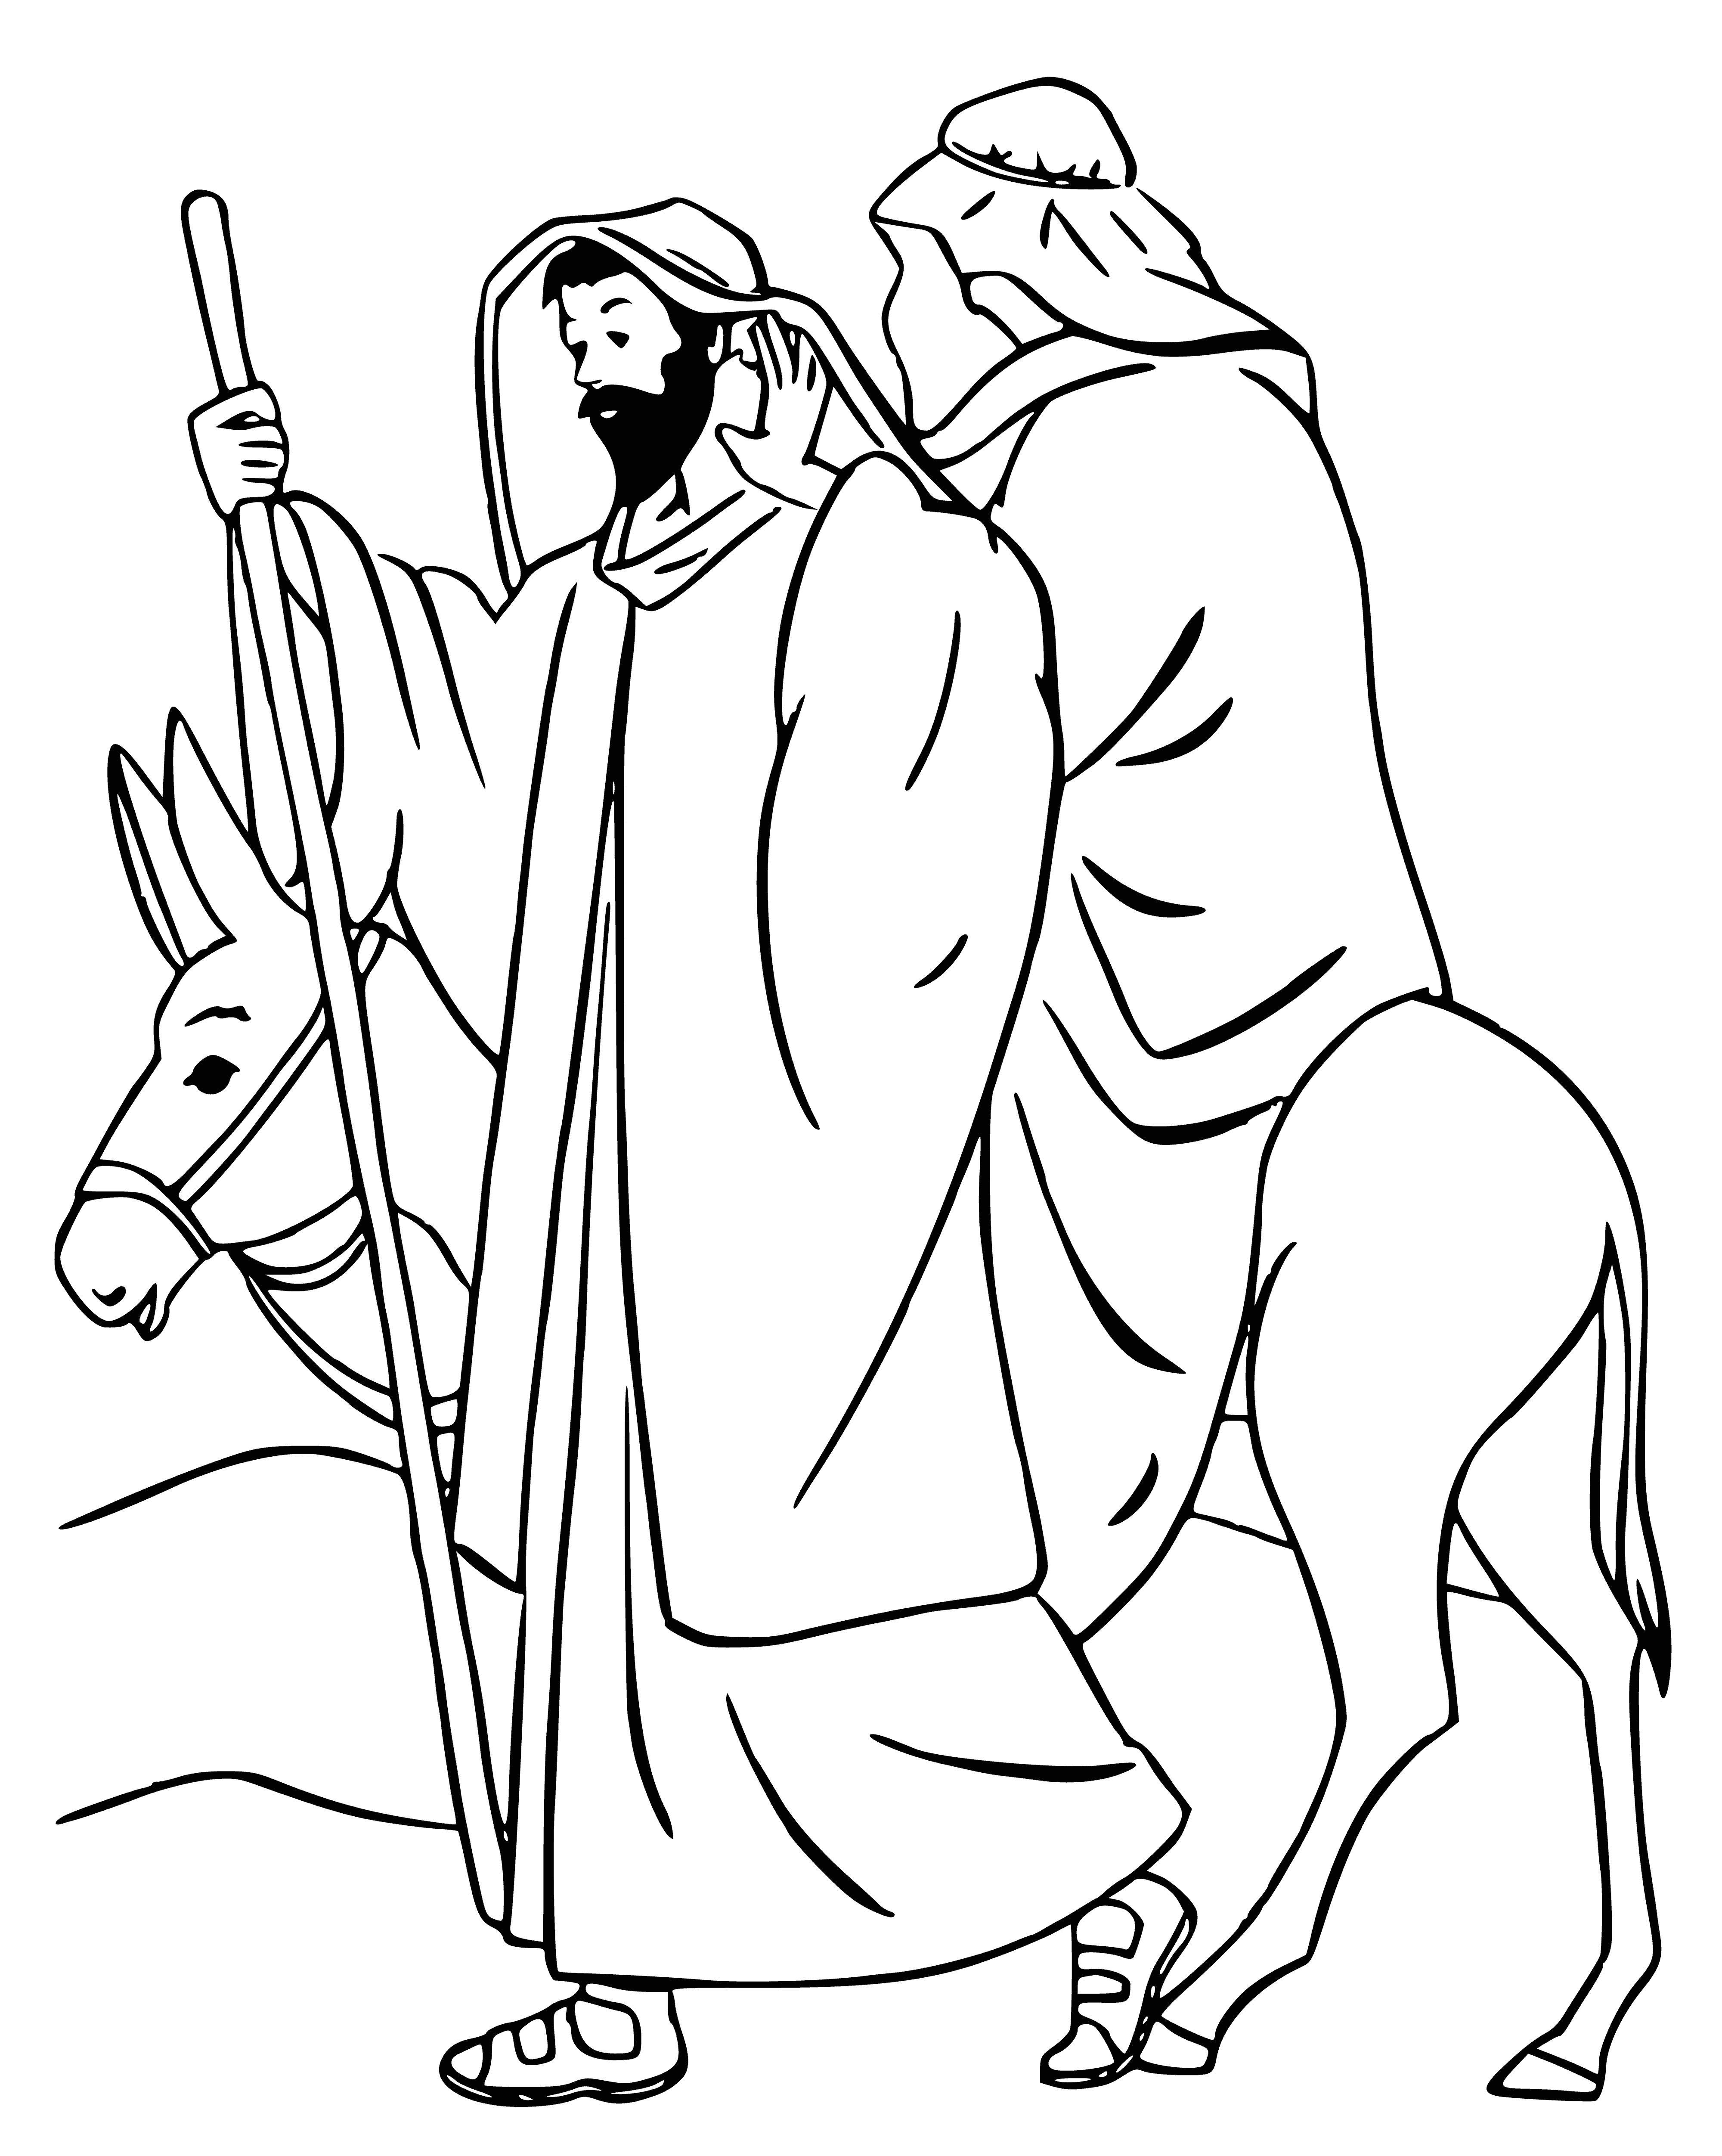 coloring page: Shepherds kneel to Baby Jesus in manger, Virgin Mary and St Joseph behind, light from above shining on the scene. #Christmas #NativityScene